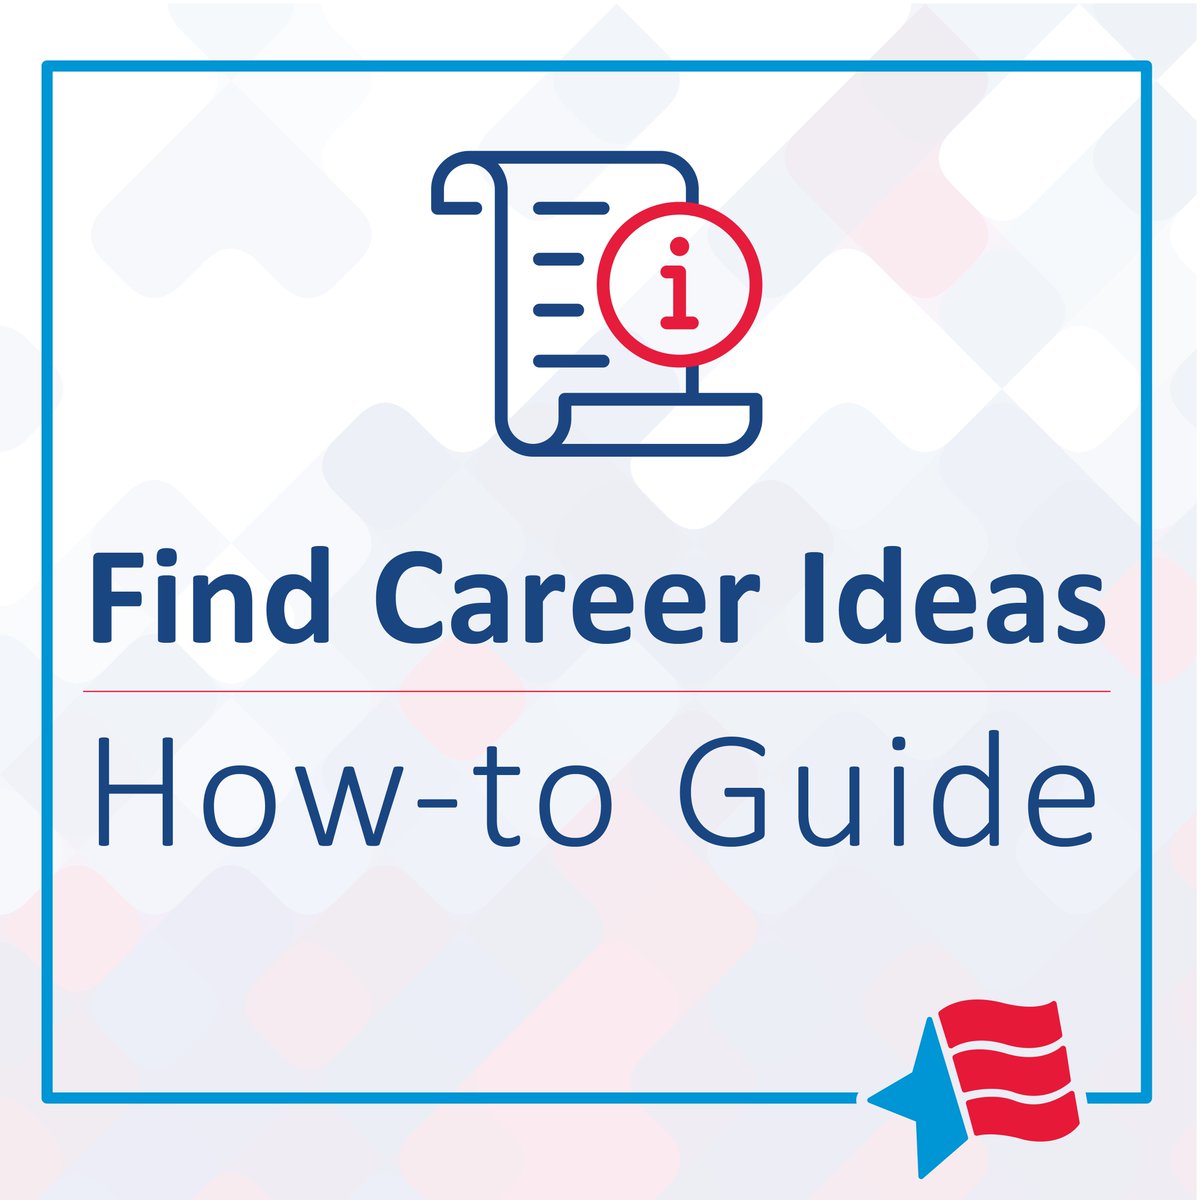 What type of job would fit you best? Check out this how-to guide: bit.ly/3RTQnlq for a guided pathway to achieve your career goals. #HowToGuides #FindCareerIdeas #FindAJobNow #SwitchCareers #AfterALayoff #JobSearchHelp #CareerTips #COSResources #CareerOneStop